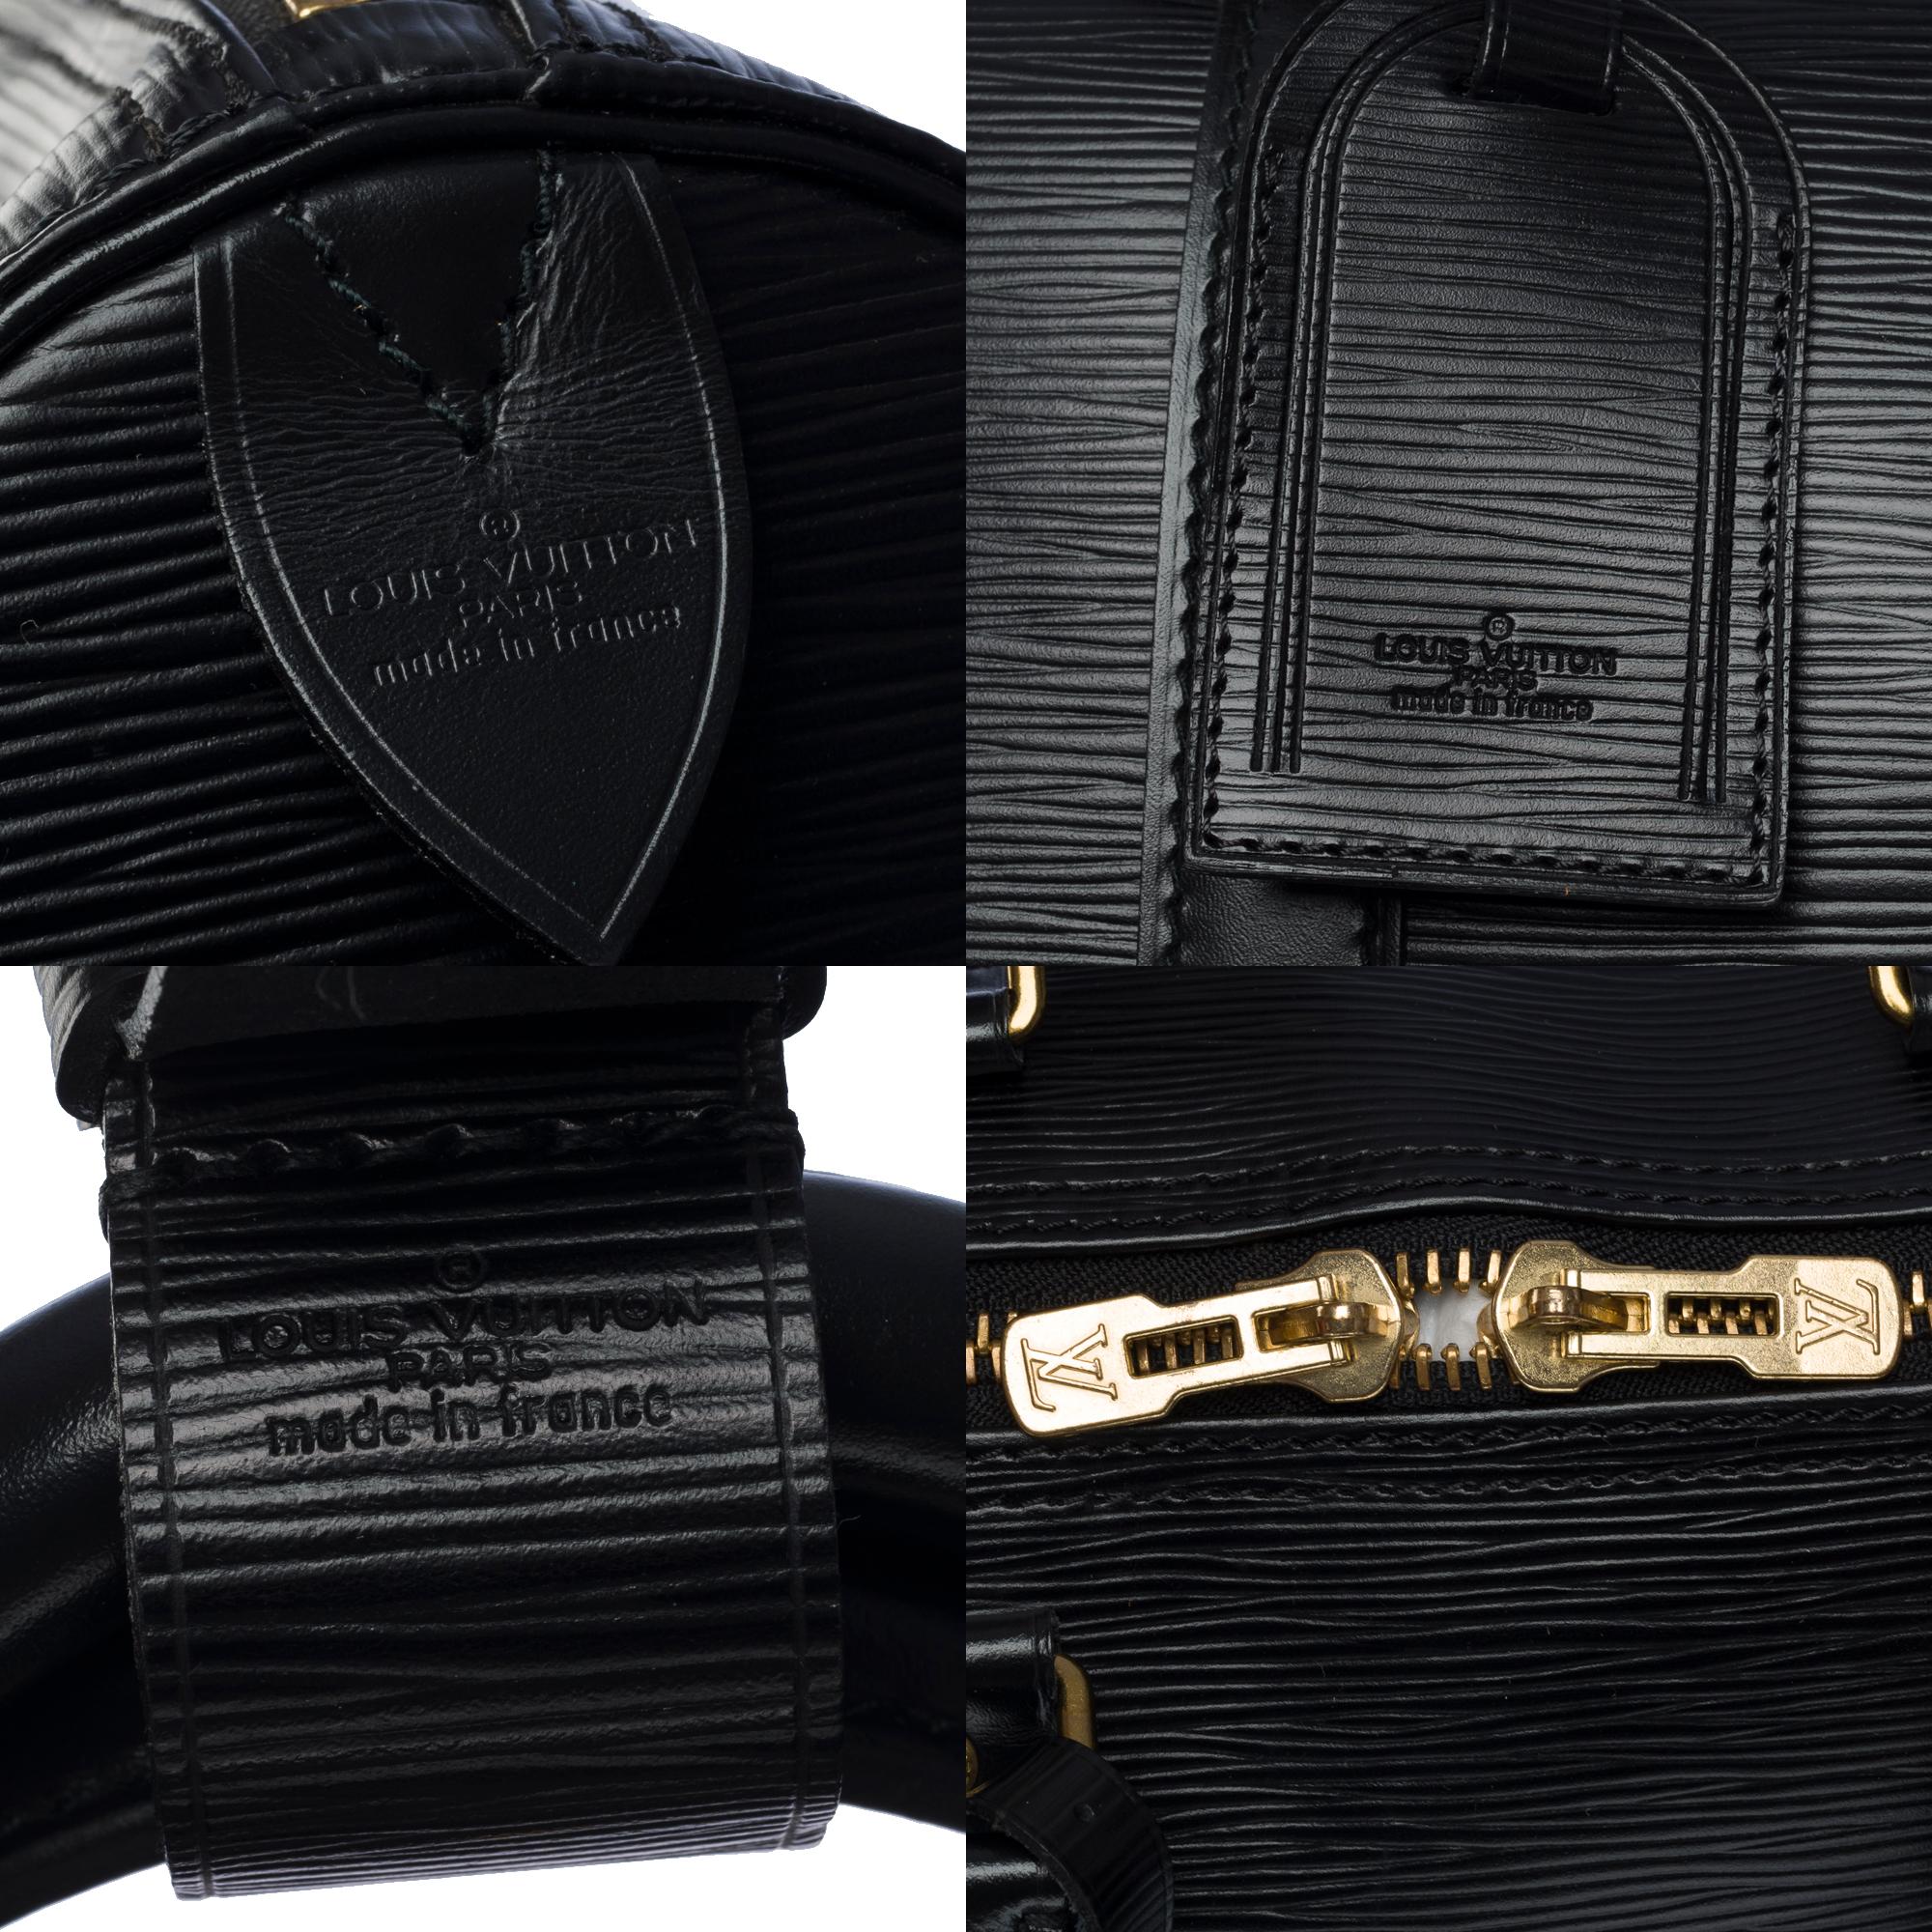 The very Chic Louis Vuitton Keepall 45 Travel bag in black epi leather, GHW 2